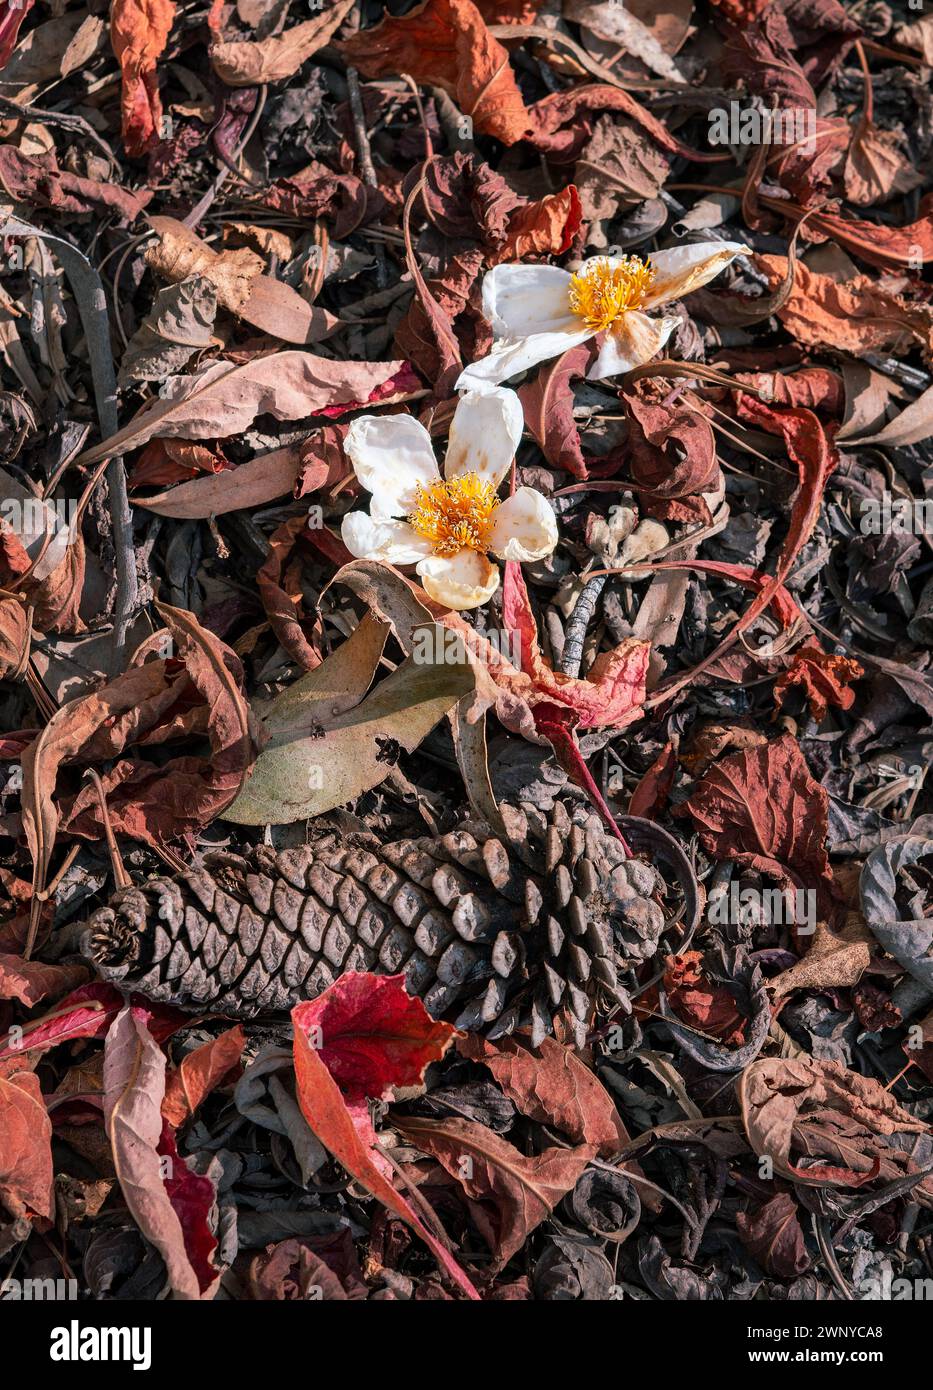 Autumn leaves of various colors drying in the sun on the forest ground. including red leaves fir cones and white flowers. Stock Photo